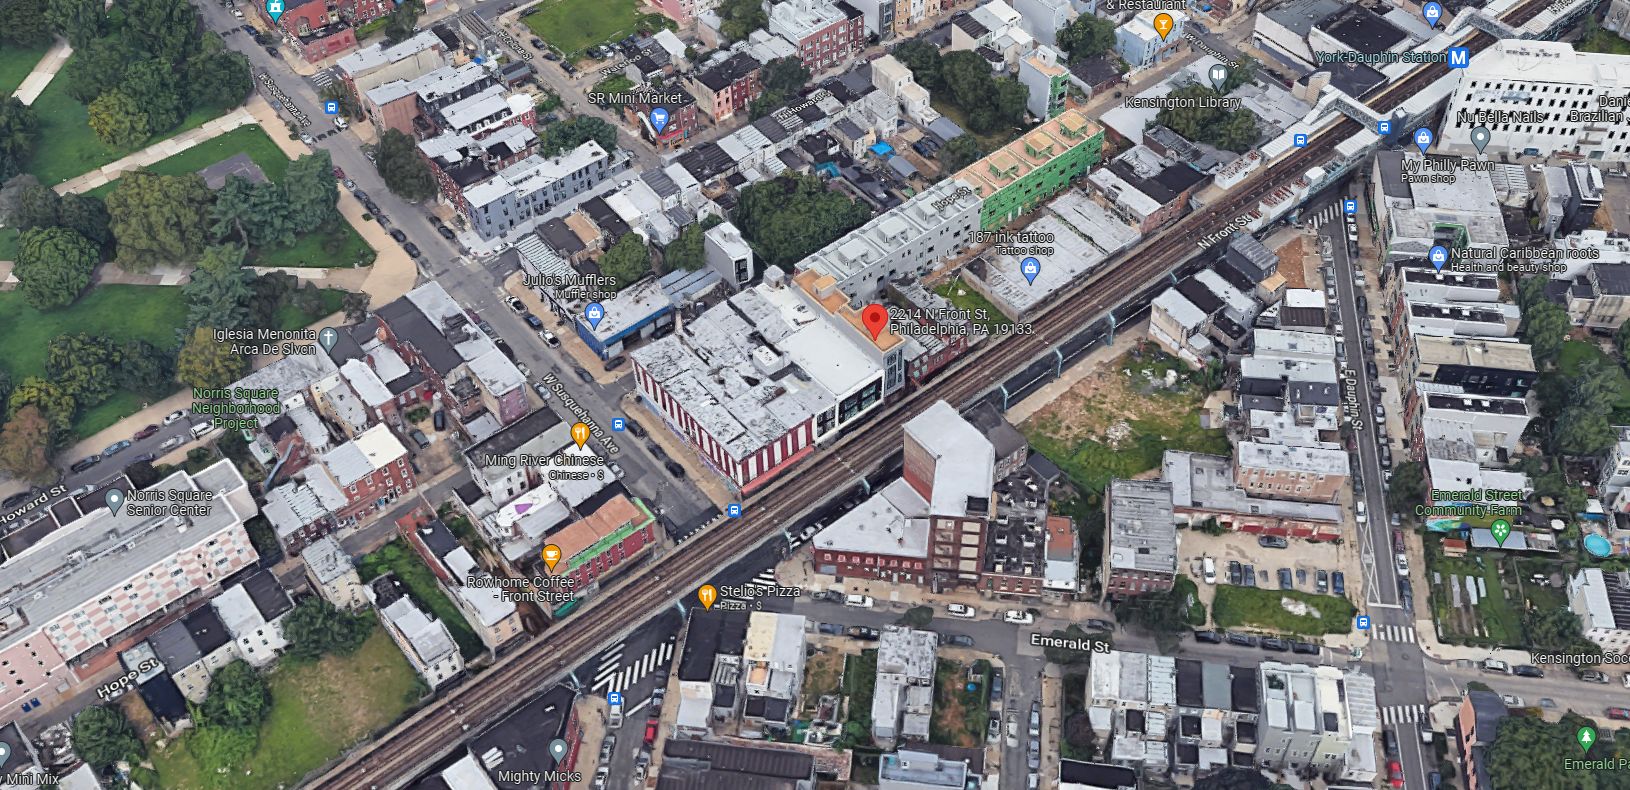 The Emerald at 2214 North Front Street. Looking northwest. Credit: Google Maps